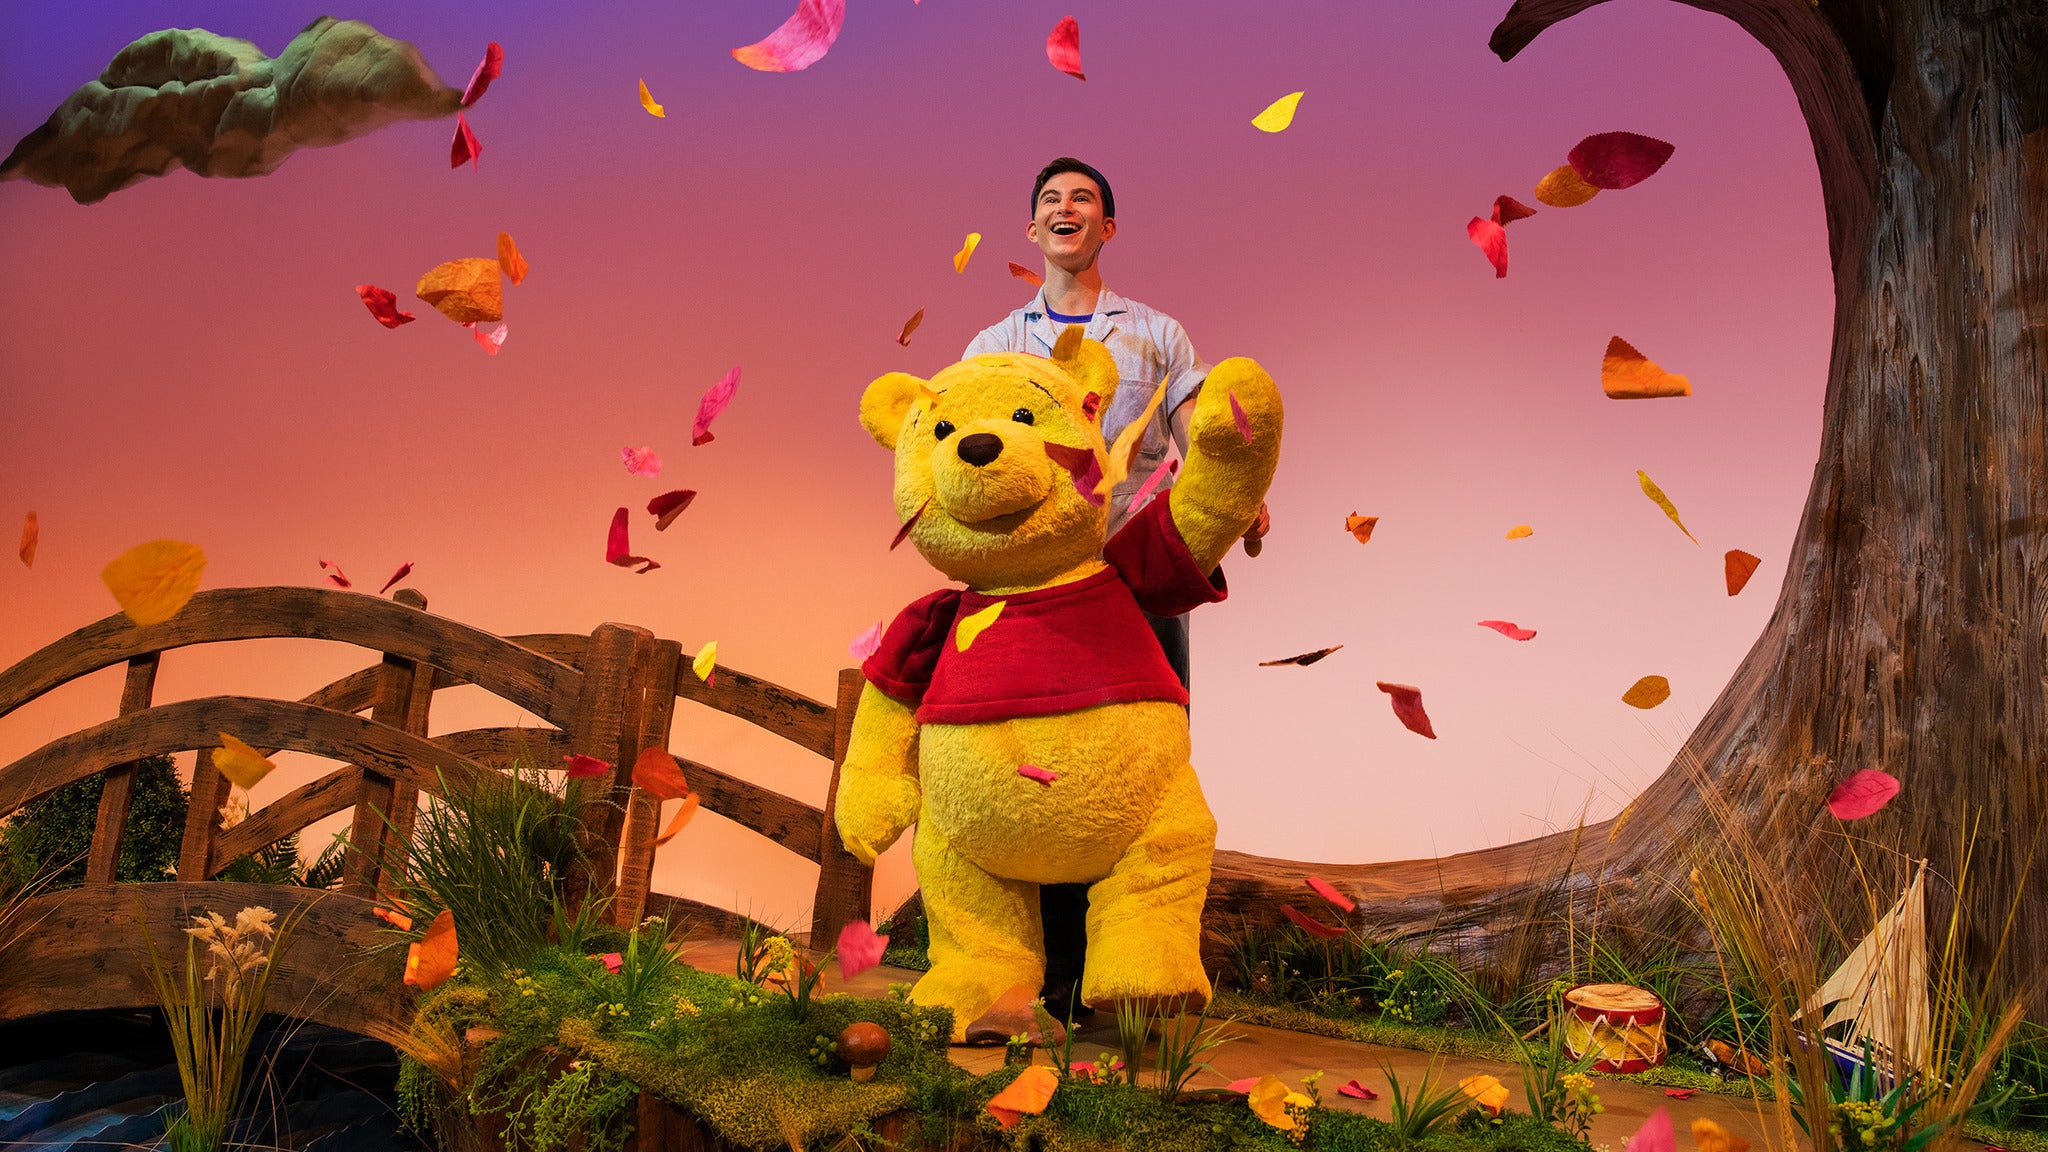 Disney's Winnie The Pooh: The New Musical Stage Adaptation presale c0de for advance tickets in Brooklyn